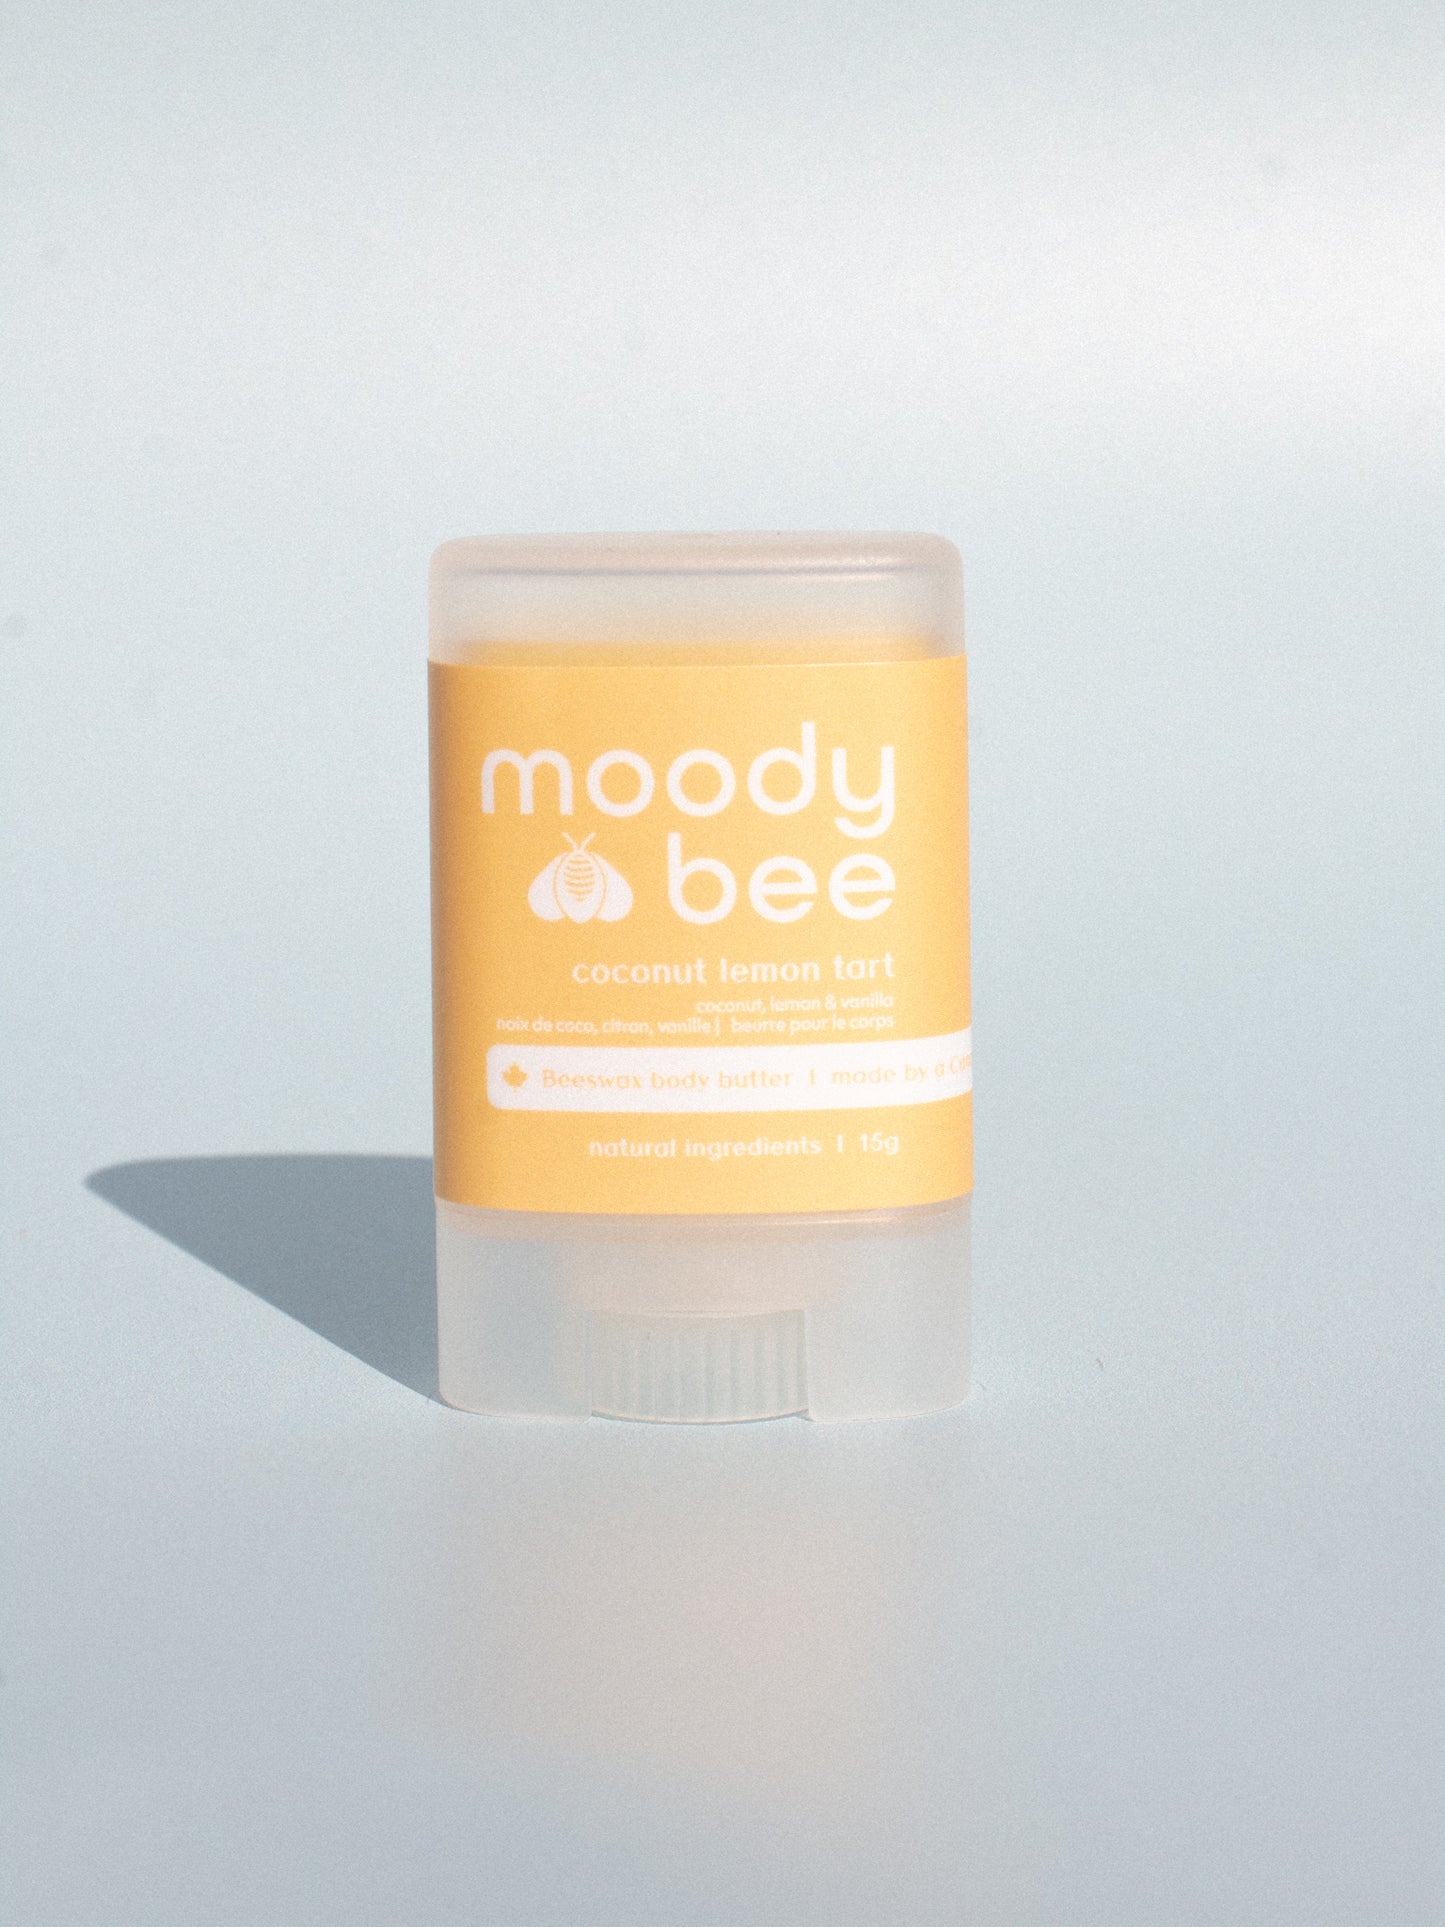 pocket size beeswax hand & body butter